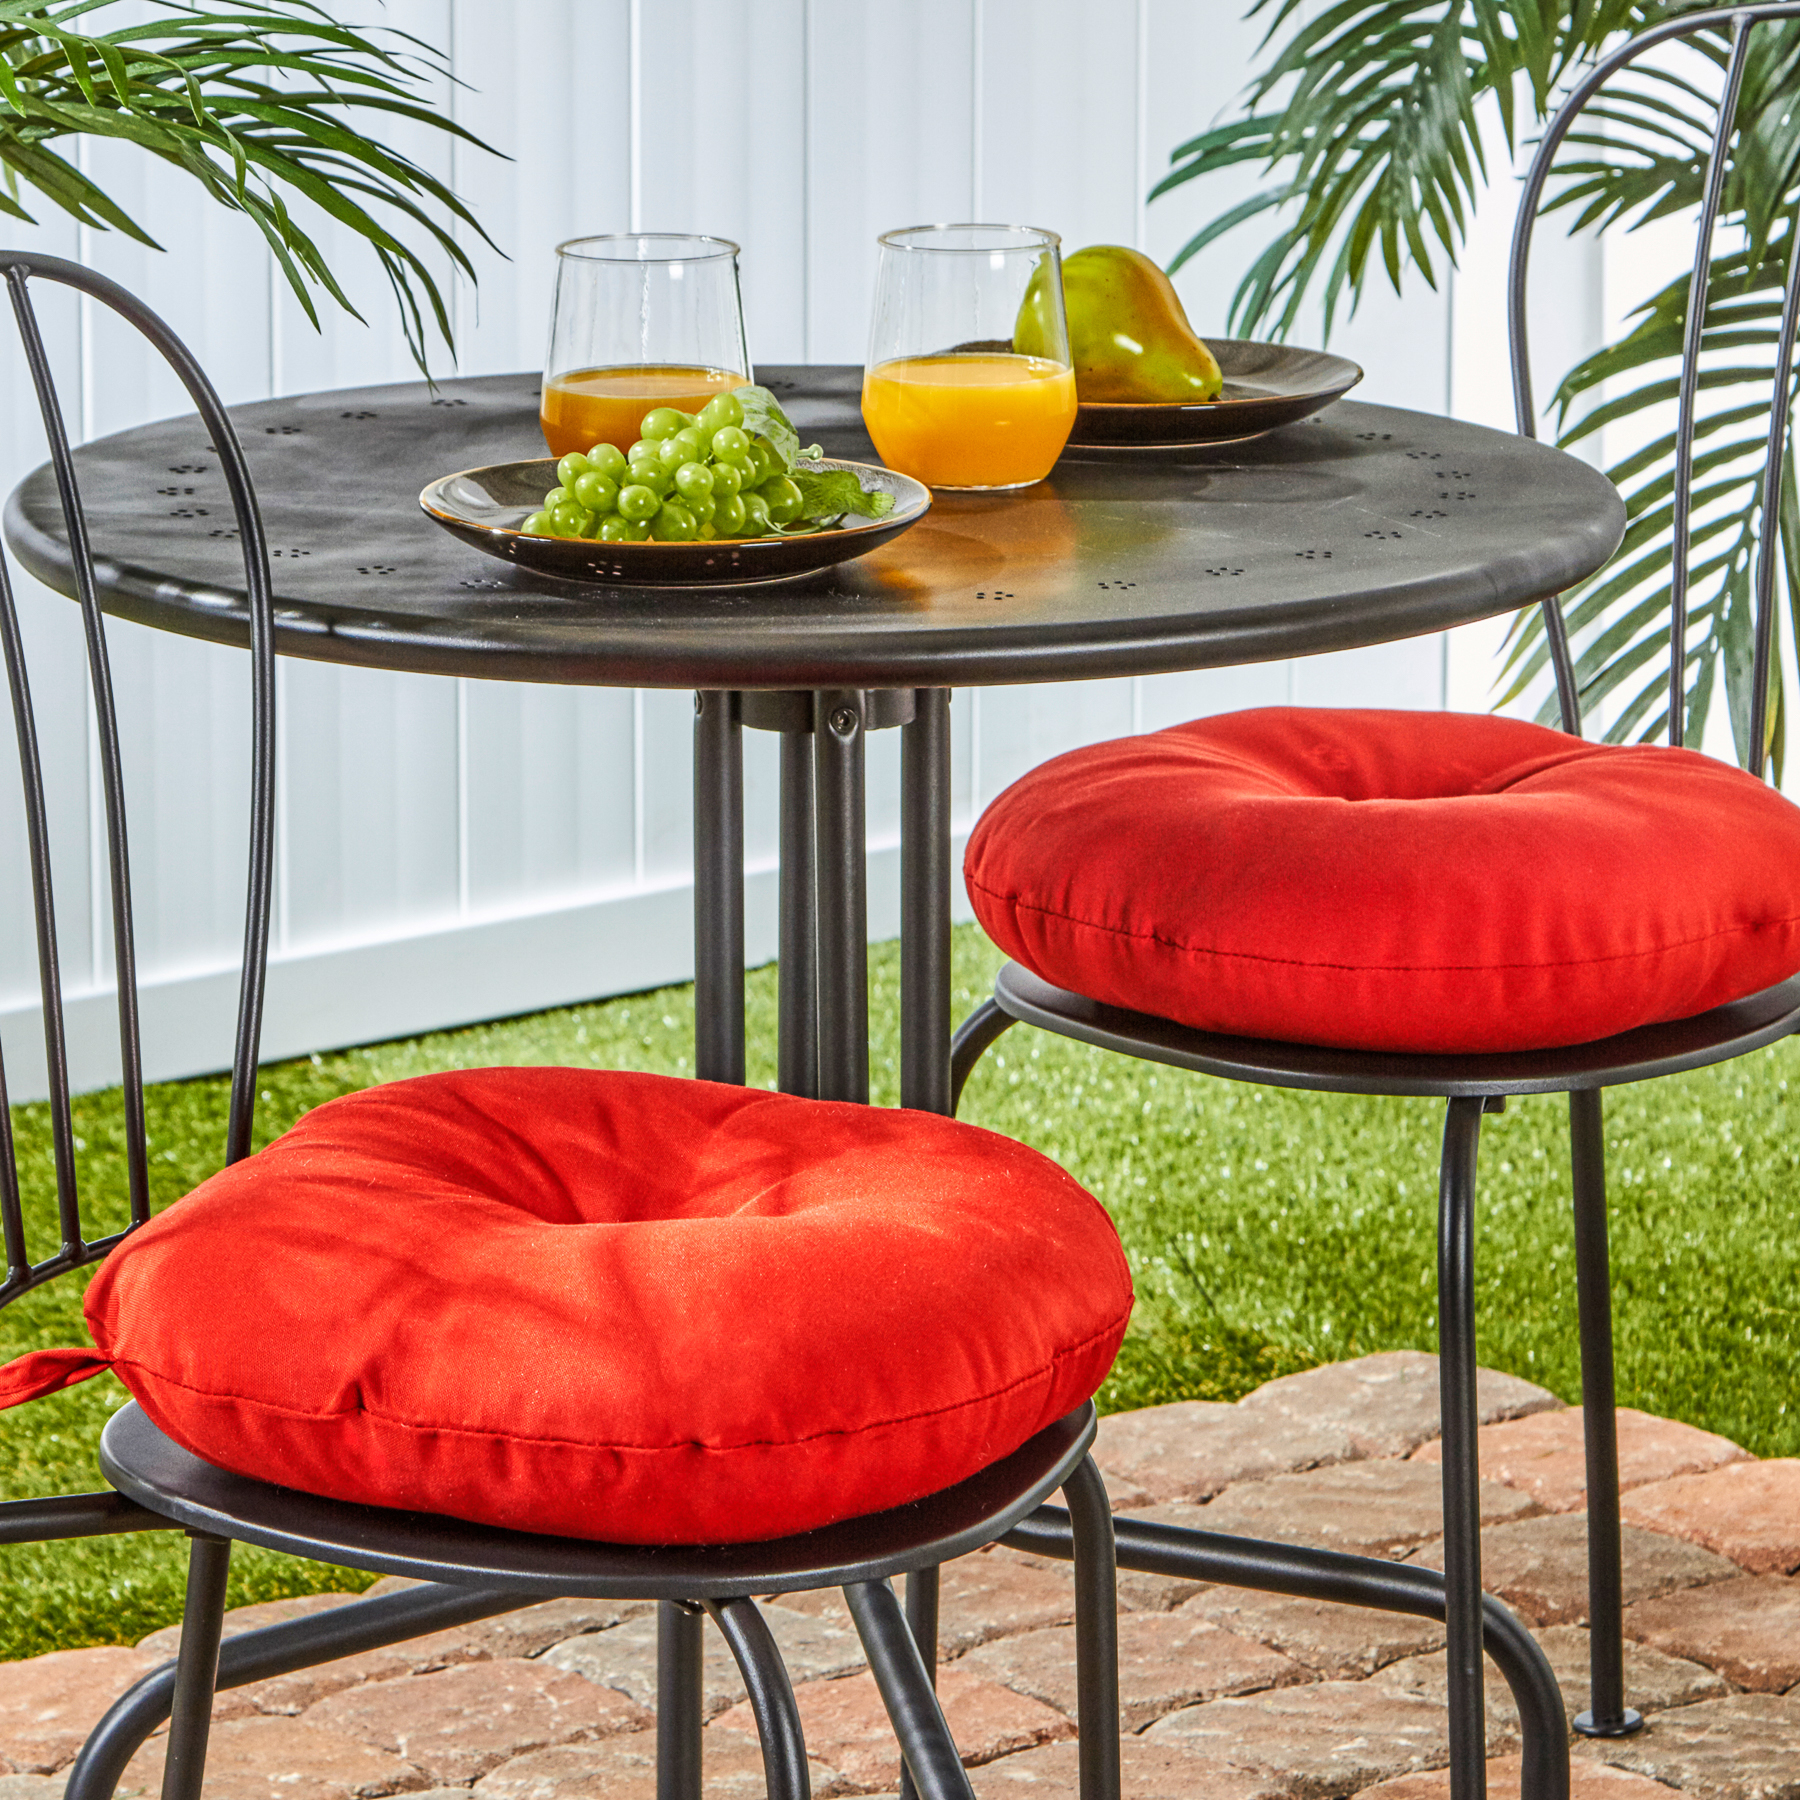 Greendale Home Fashions Salsa 15 in. Round Outdoor Reversible Bistro Seat Cushion (Set of 2) - image 5 of 7